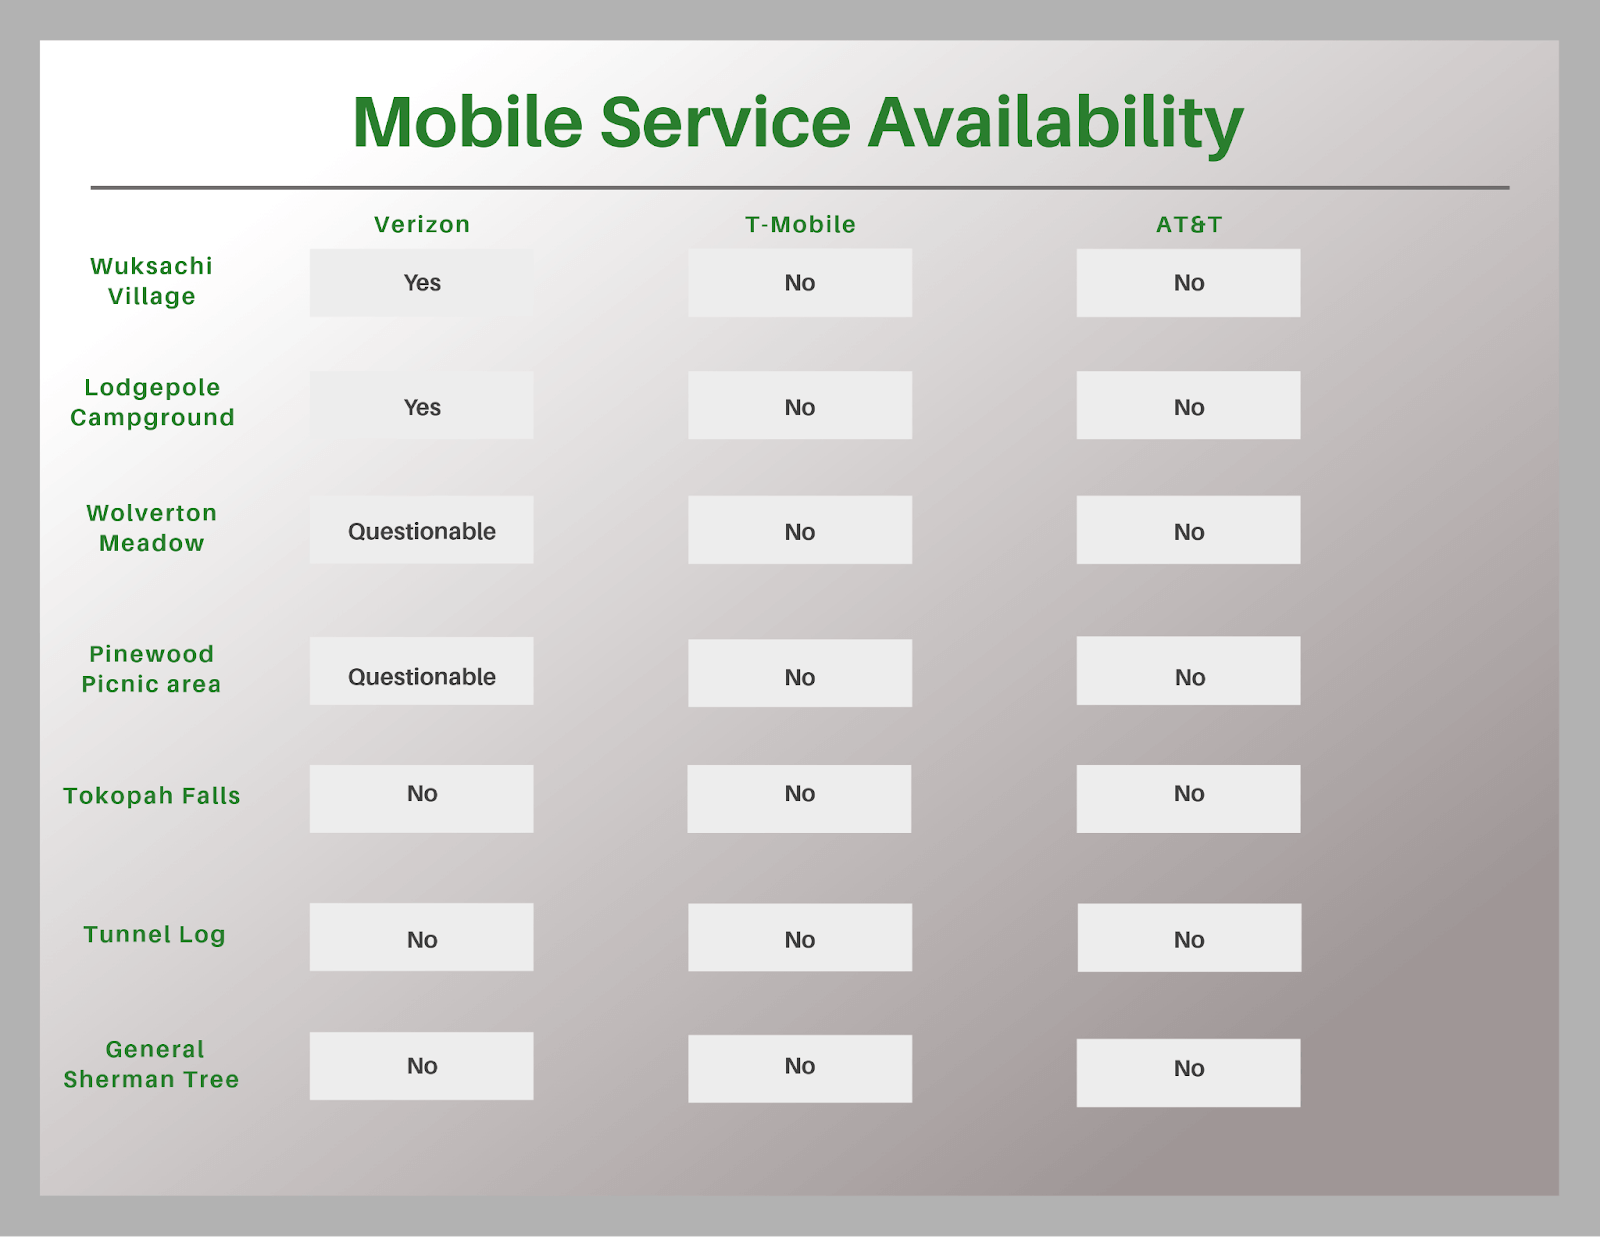 Table of areas with mobile service in Sequoia park.